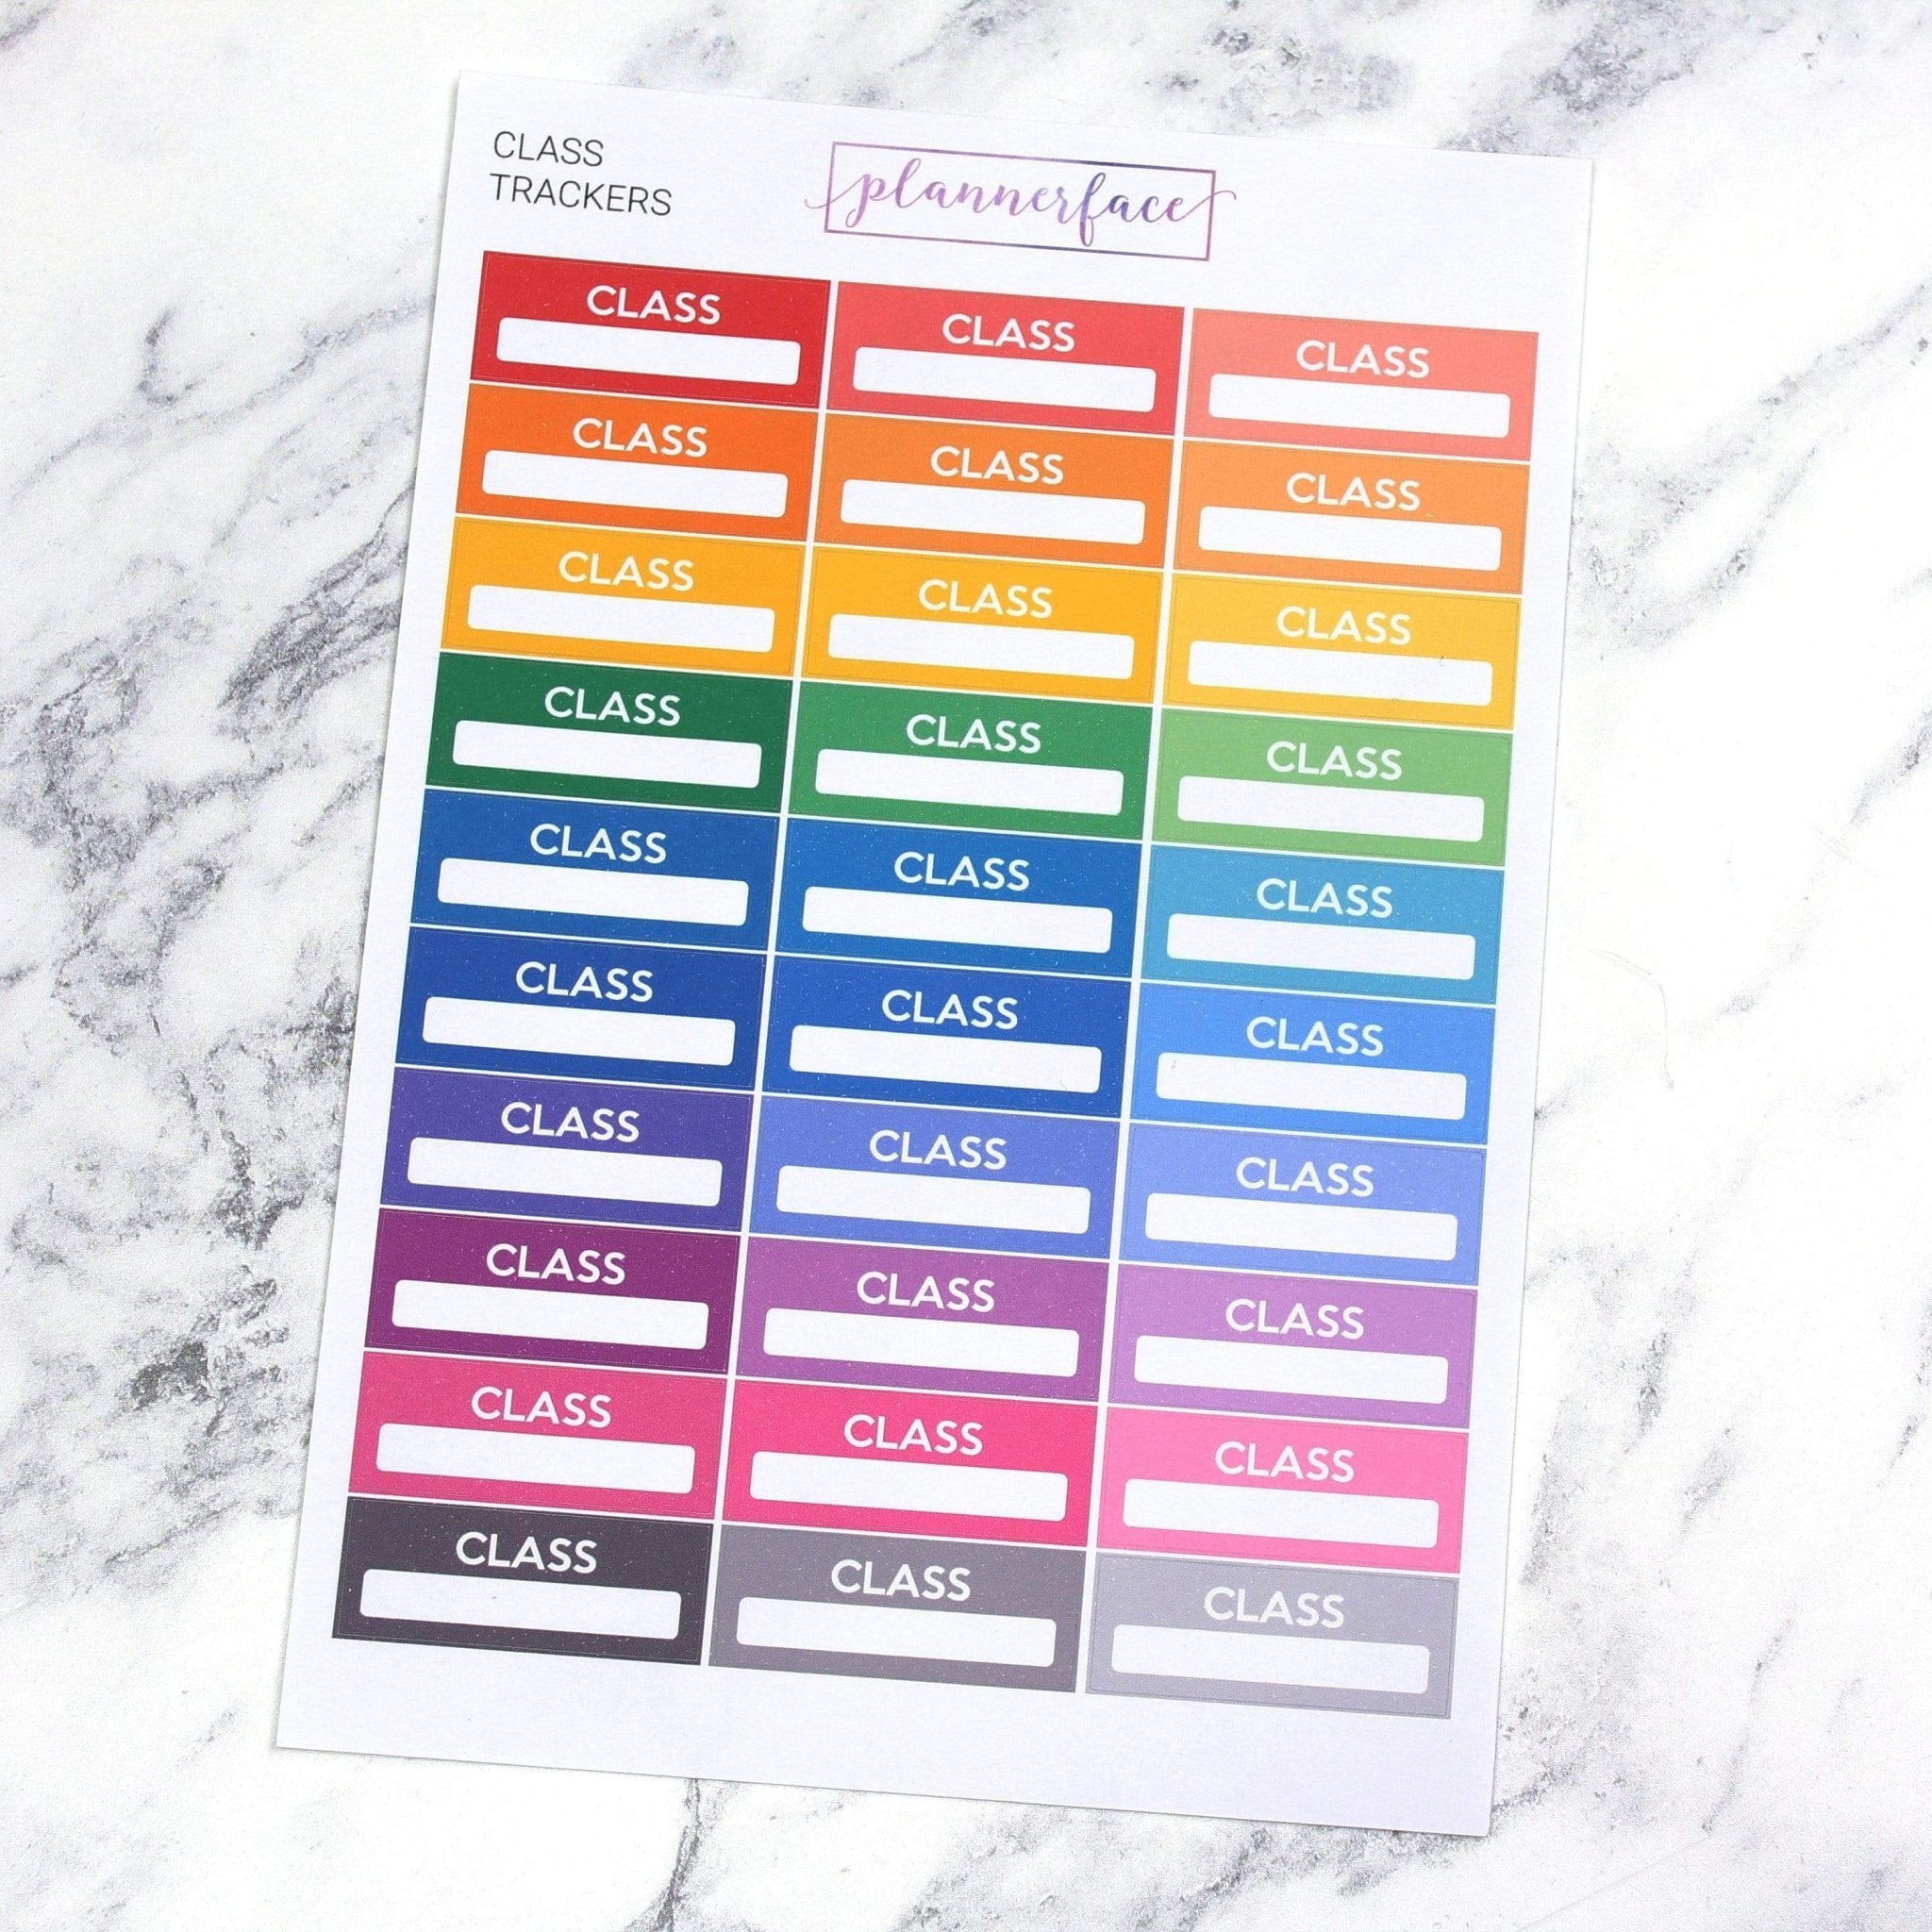 Class Trackers | Multicolour by Plannerface